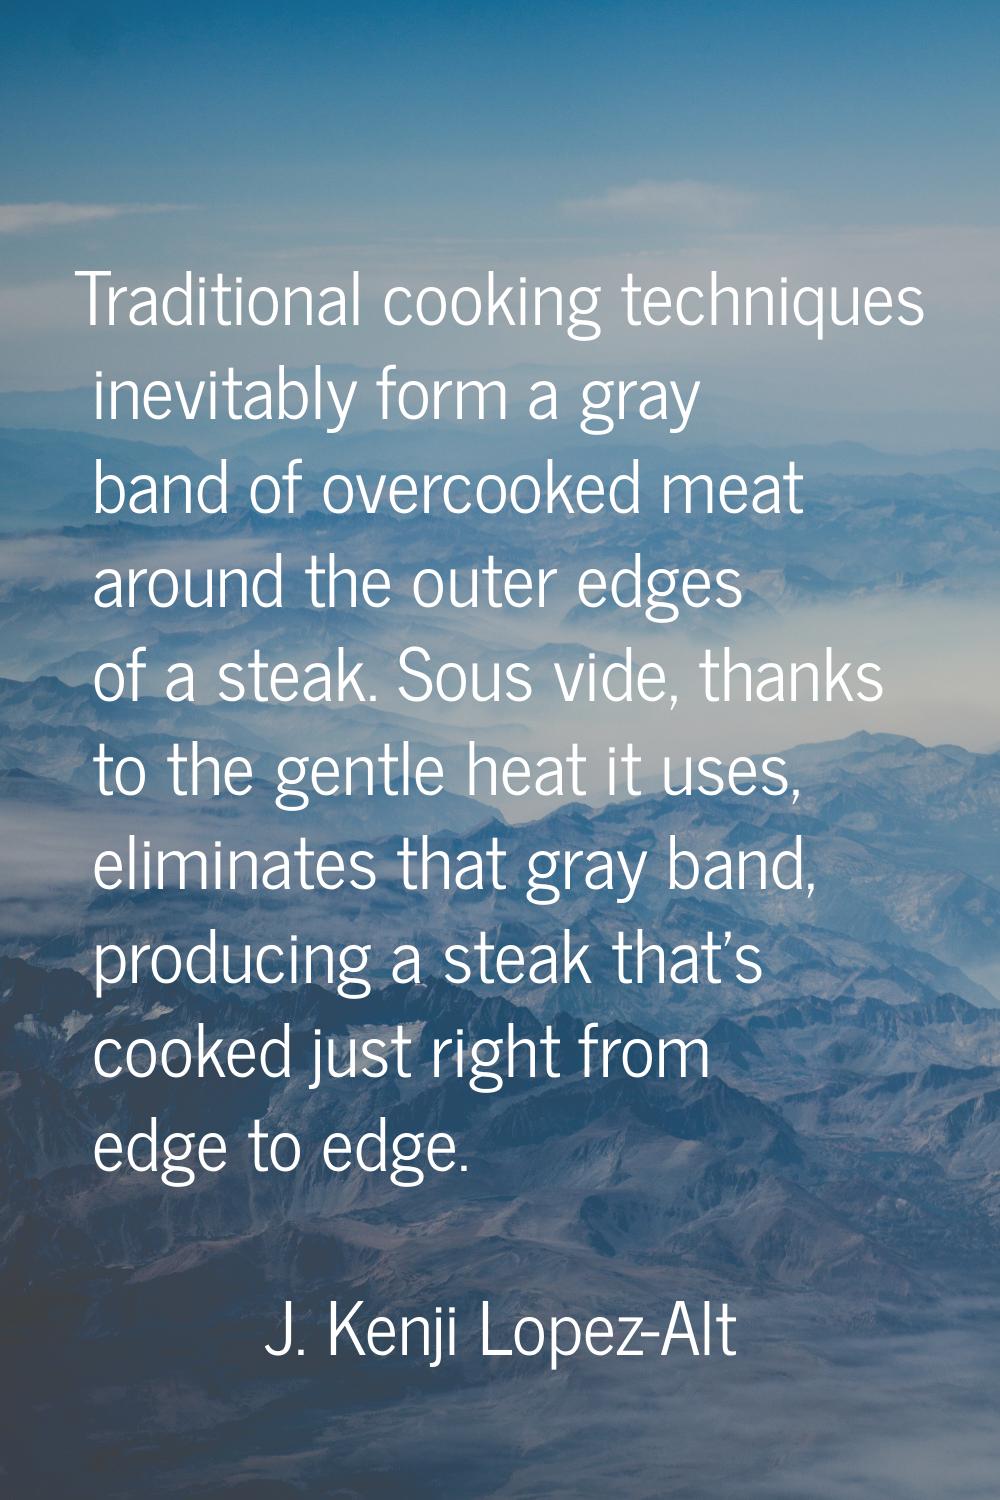 Traditional cooking techniques inevitably form a gray band of overcooked meat around the outer edge